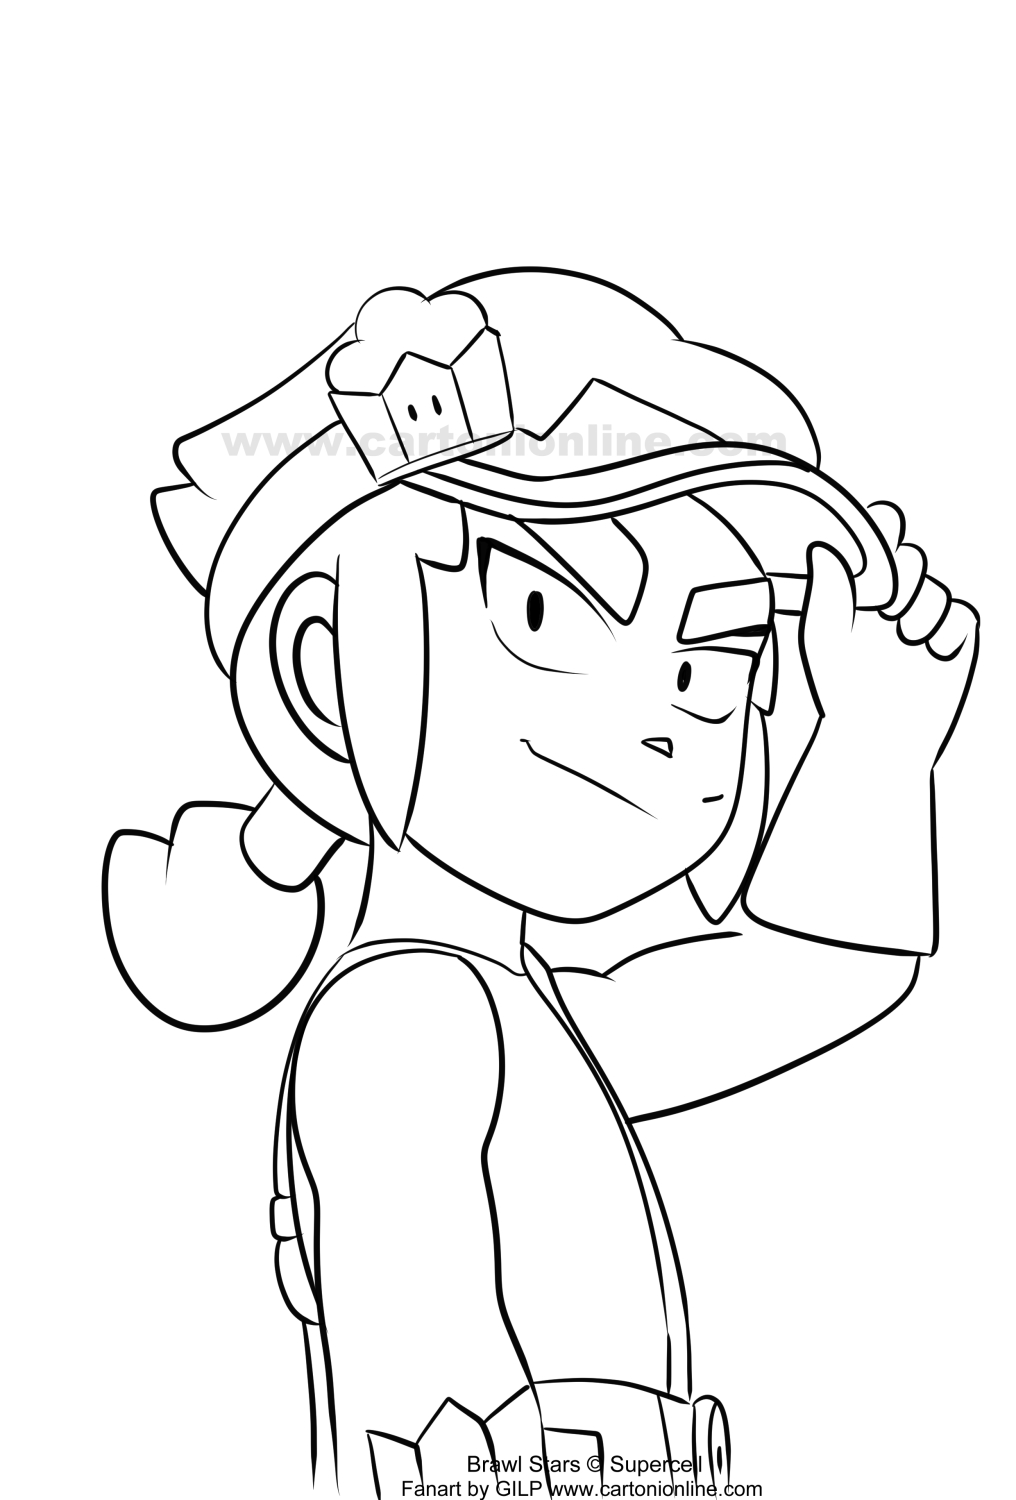 Fang 07 from Brawl Stars coloring page to print and coloring